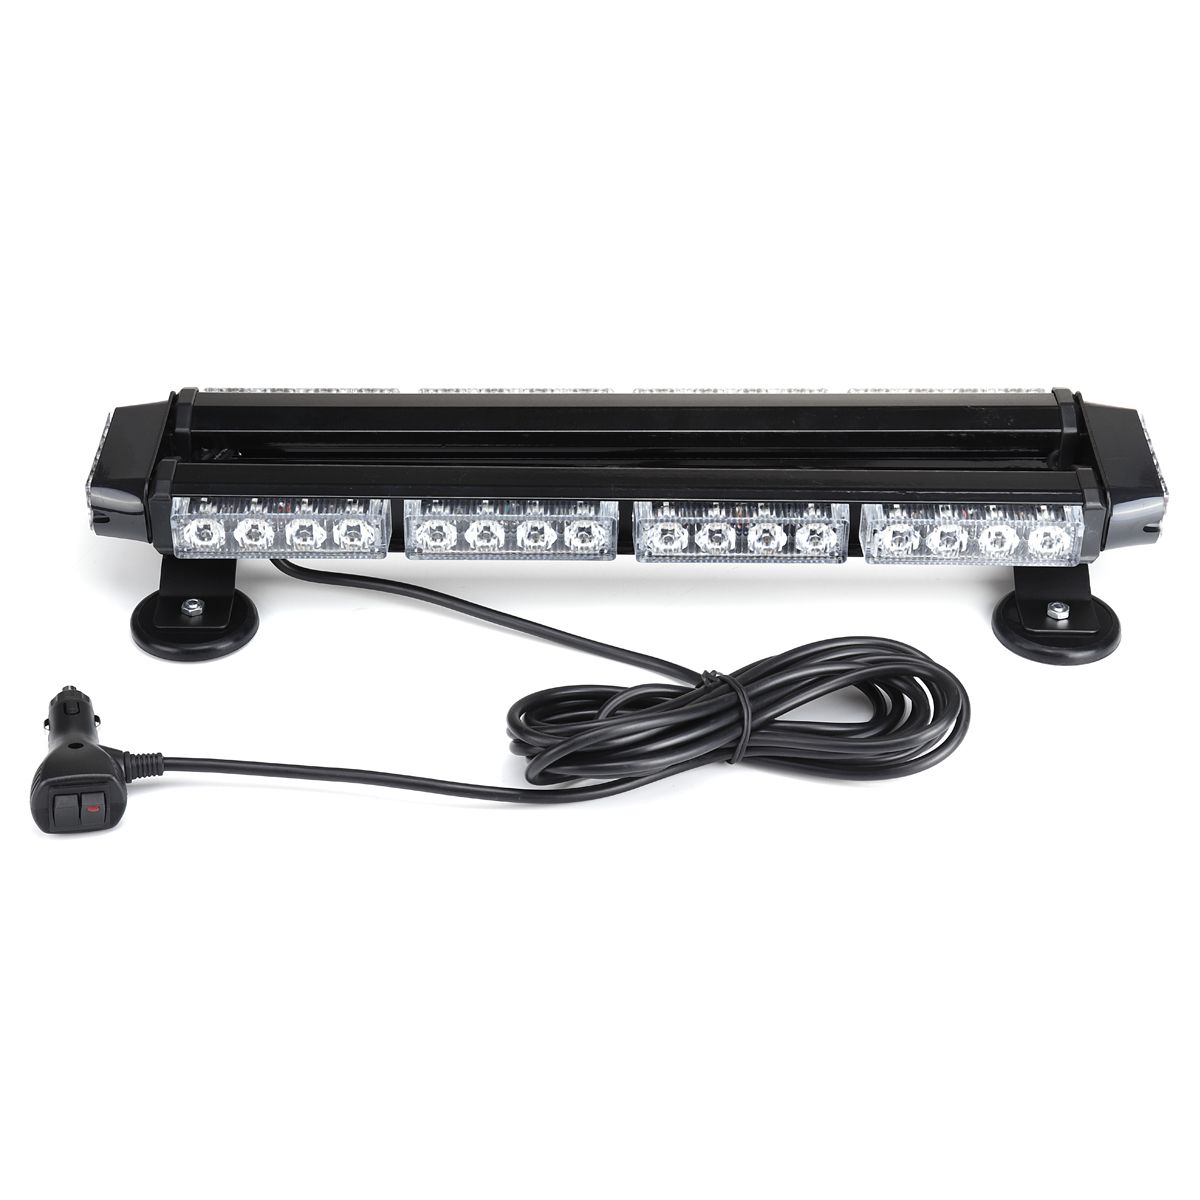 12V-20quot-38LED-Car-Roof-Double-Side-Emergency-Strobe-Flash-Light-Lamp-Bar-White-and-Amber-For-Car--1705630